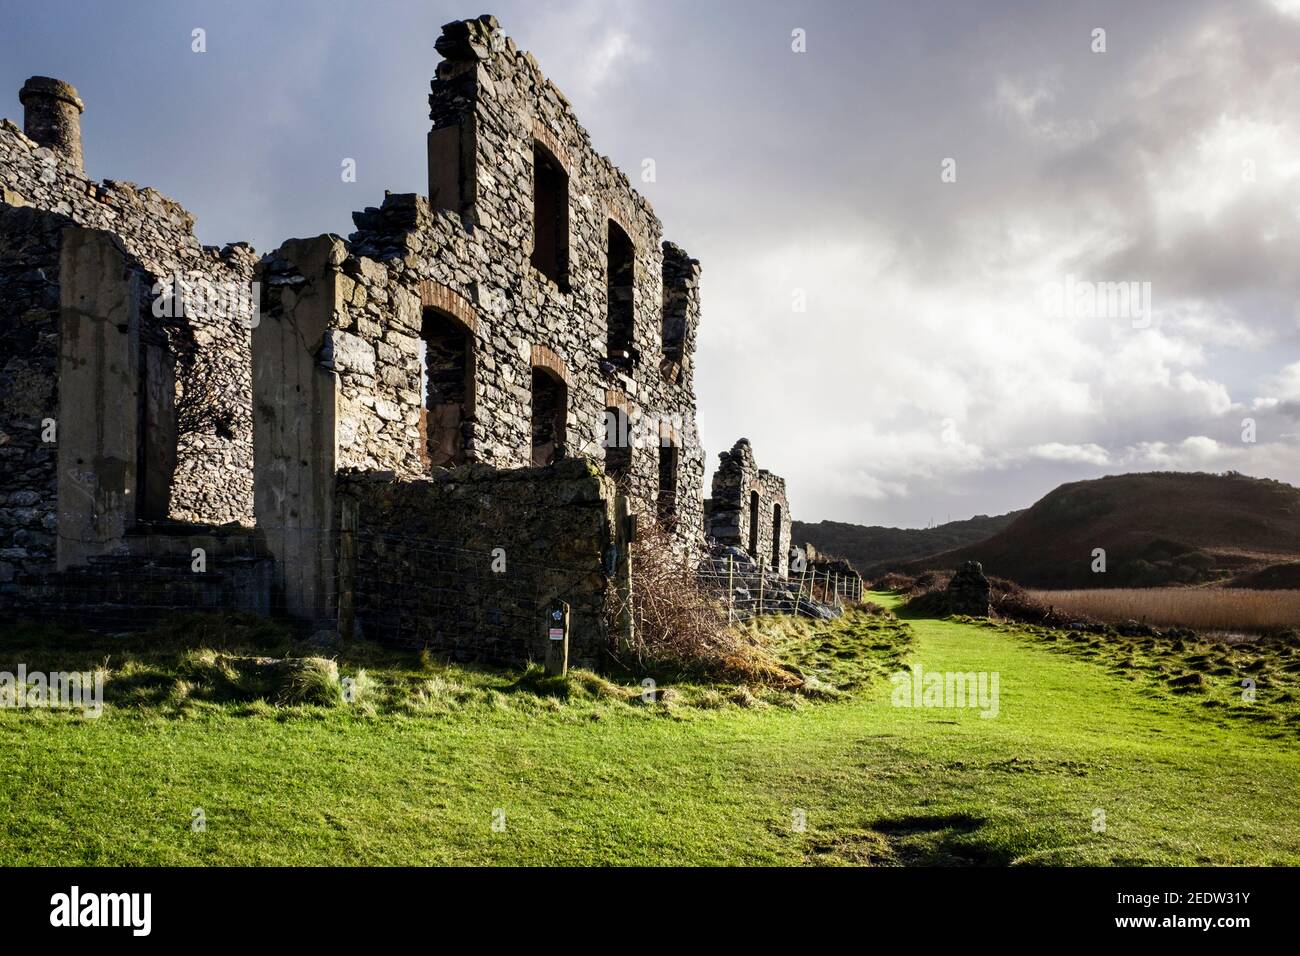 Remains of derelict old porcelain works building on Anglesey Coastal Path at Porth Llanlleiana Bay, Cemaes, Isle of Anglesey, North Wales, UK, Britain Stock Photo